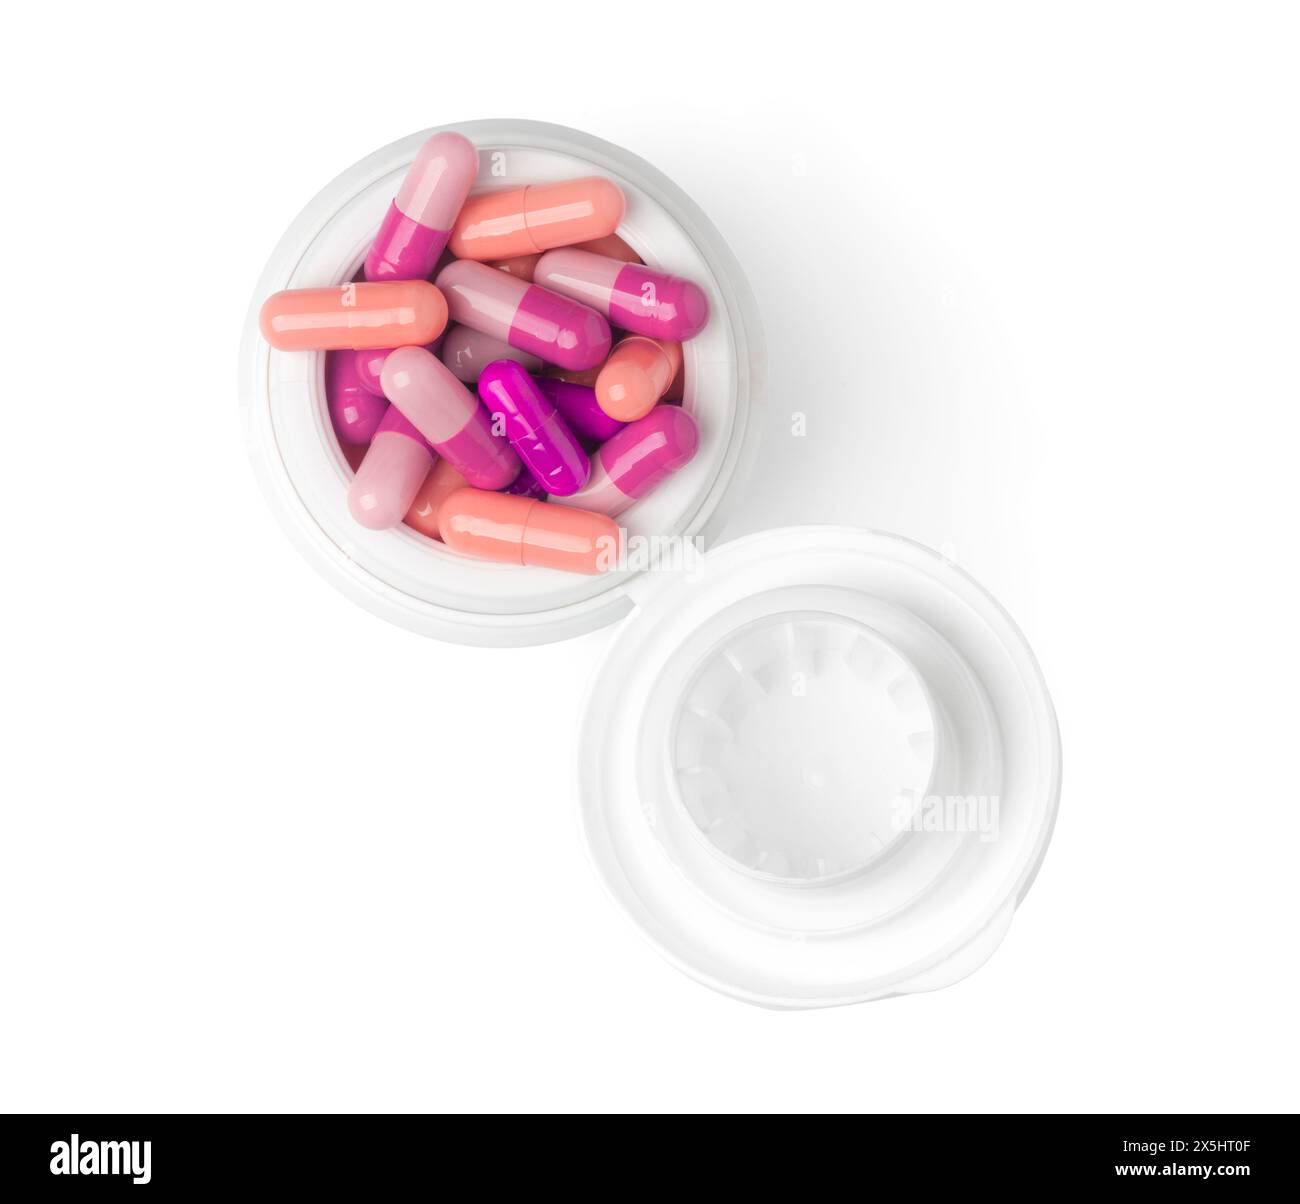 Colorful pills on bottle top view against white background Stock Photo